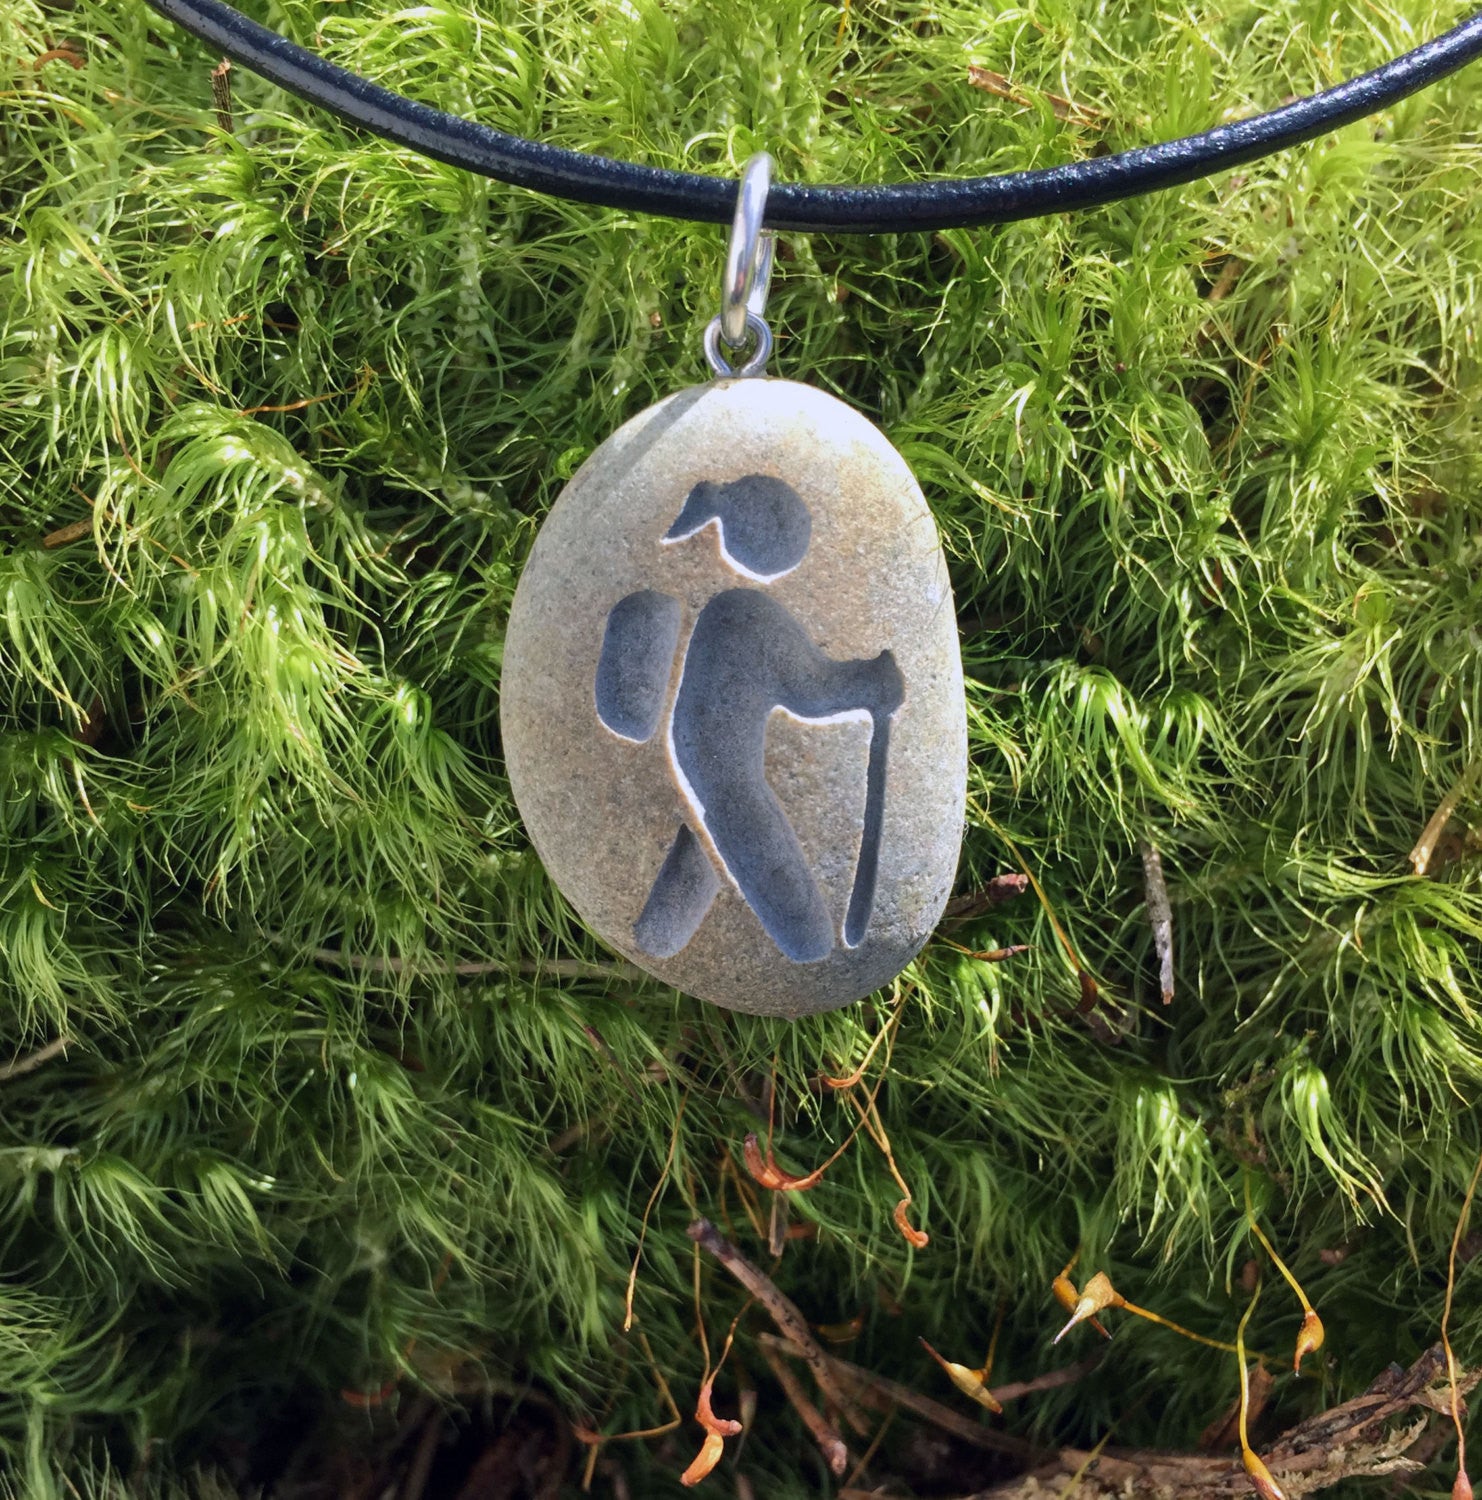 Hiker ahead! Hiking Lover's symbol- choose Male or Female! Engraved Beach Stone Pendant Jewelry - Cast a Stone